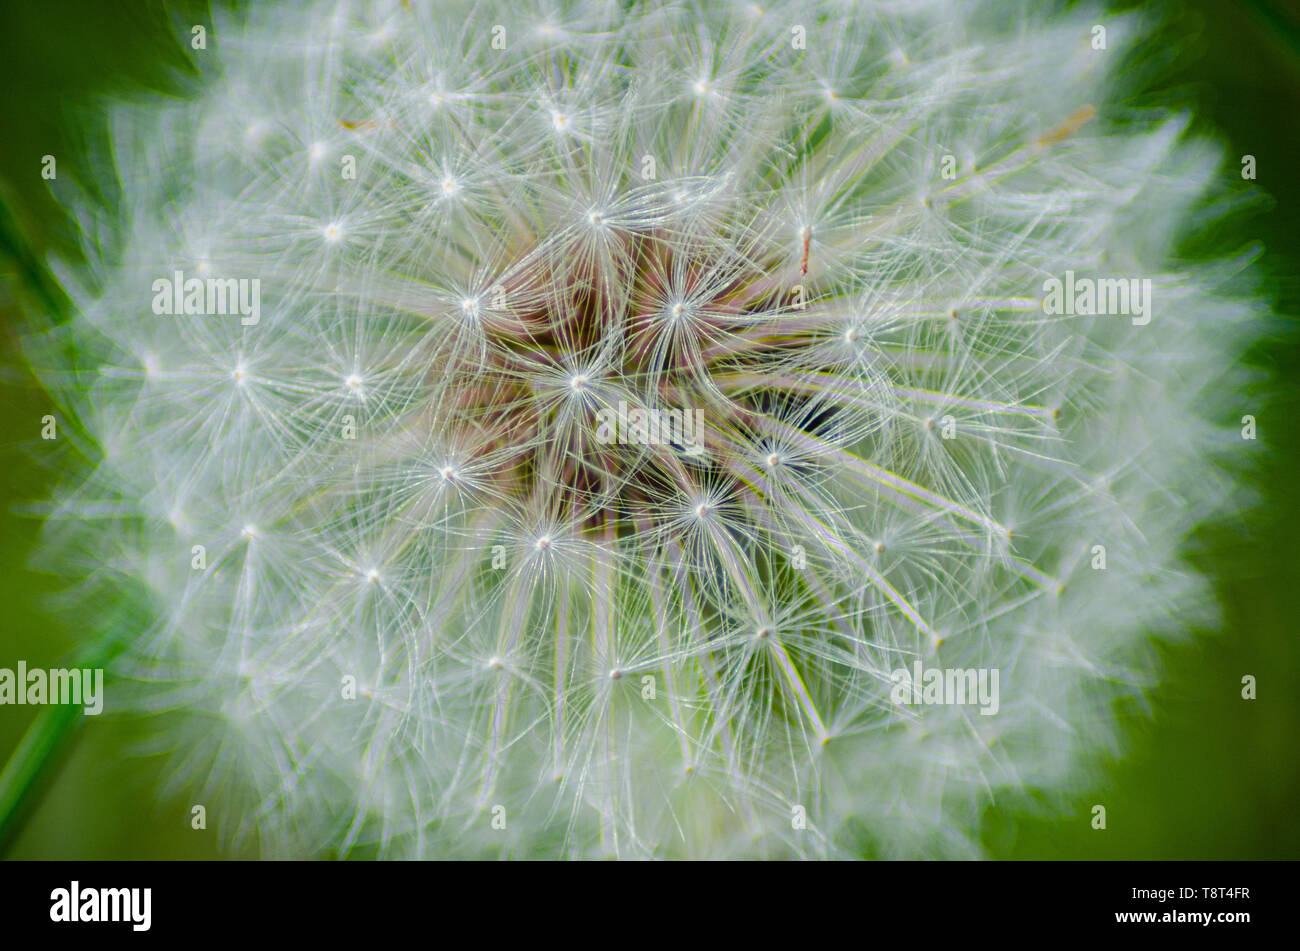 A close up of a dandelion seed head shows the white seed detail. The mature seeds are attached to white, fluffy 'parachutes'. Stock Photo